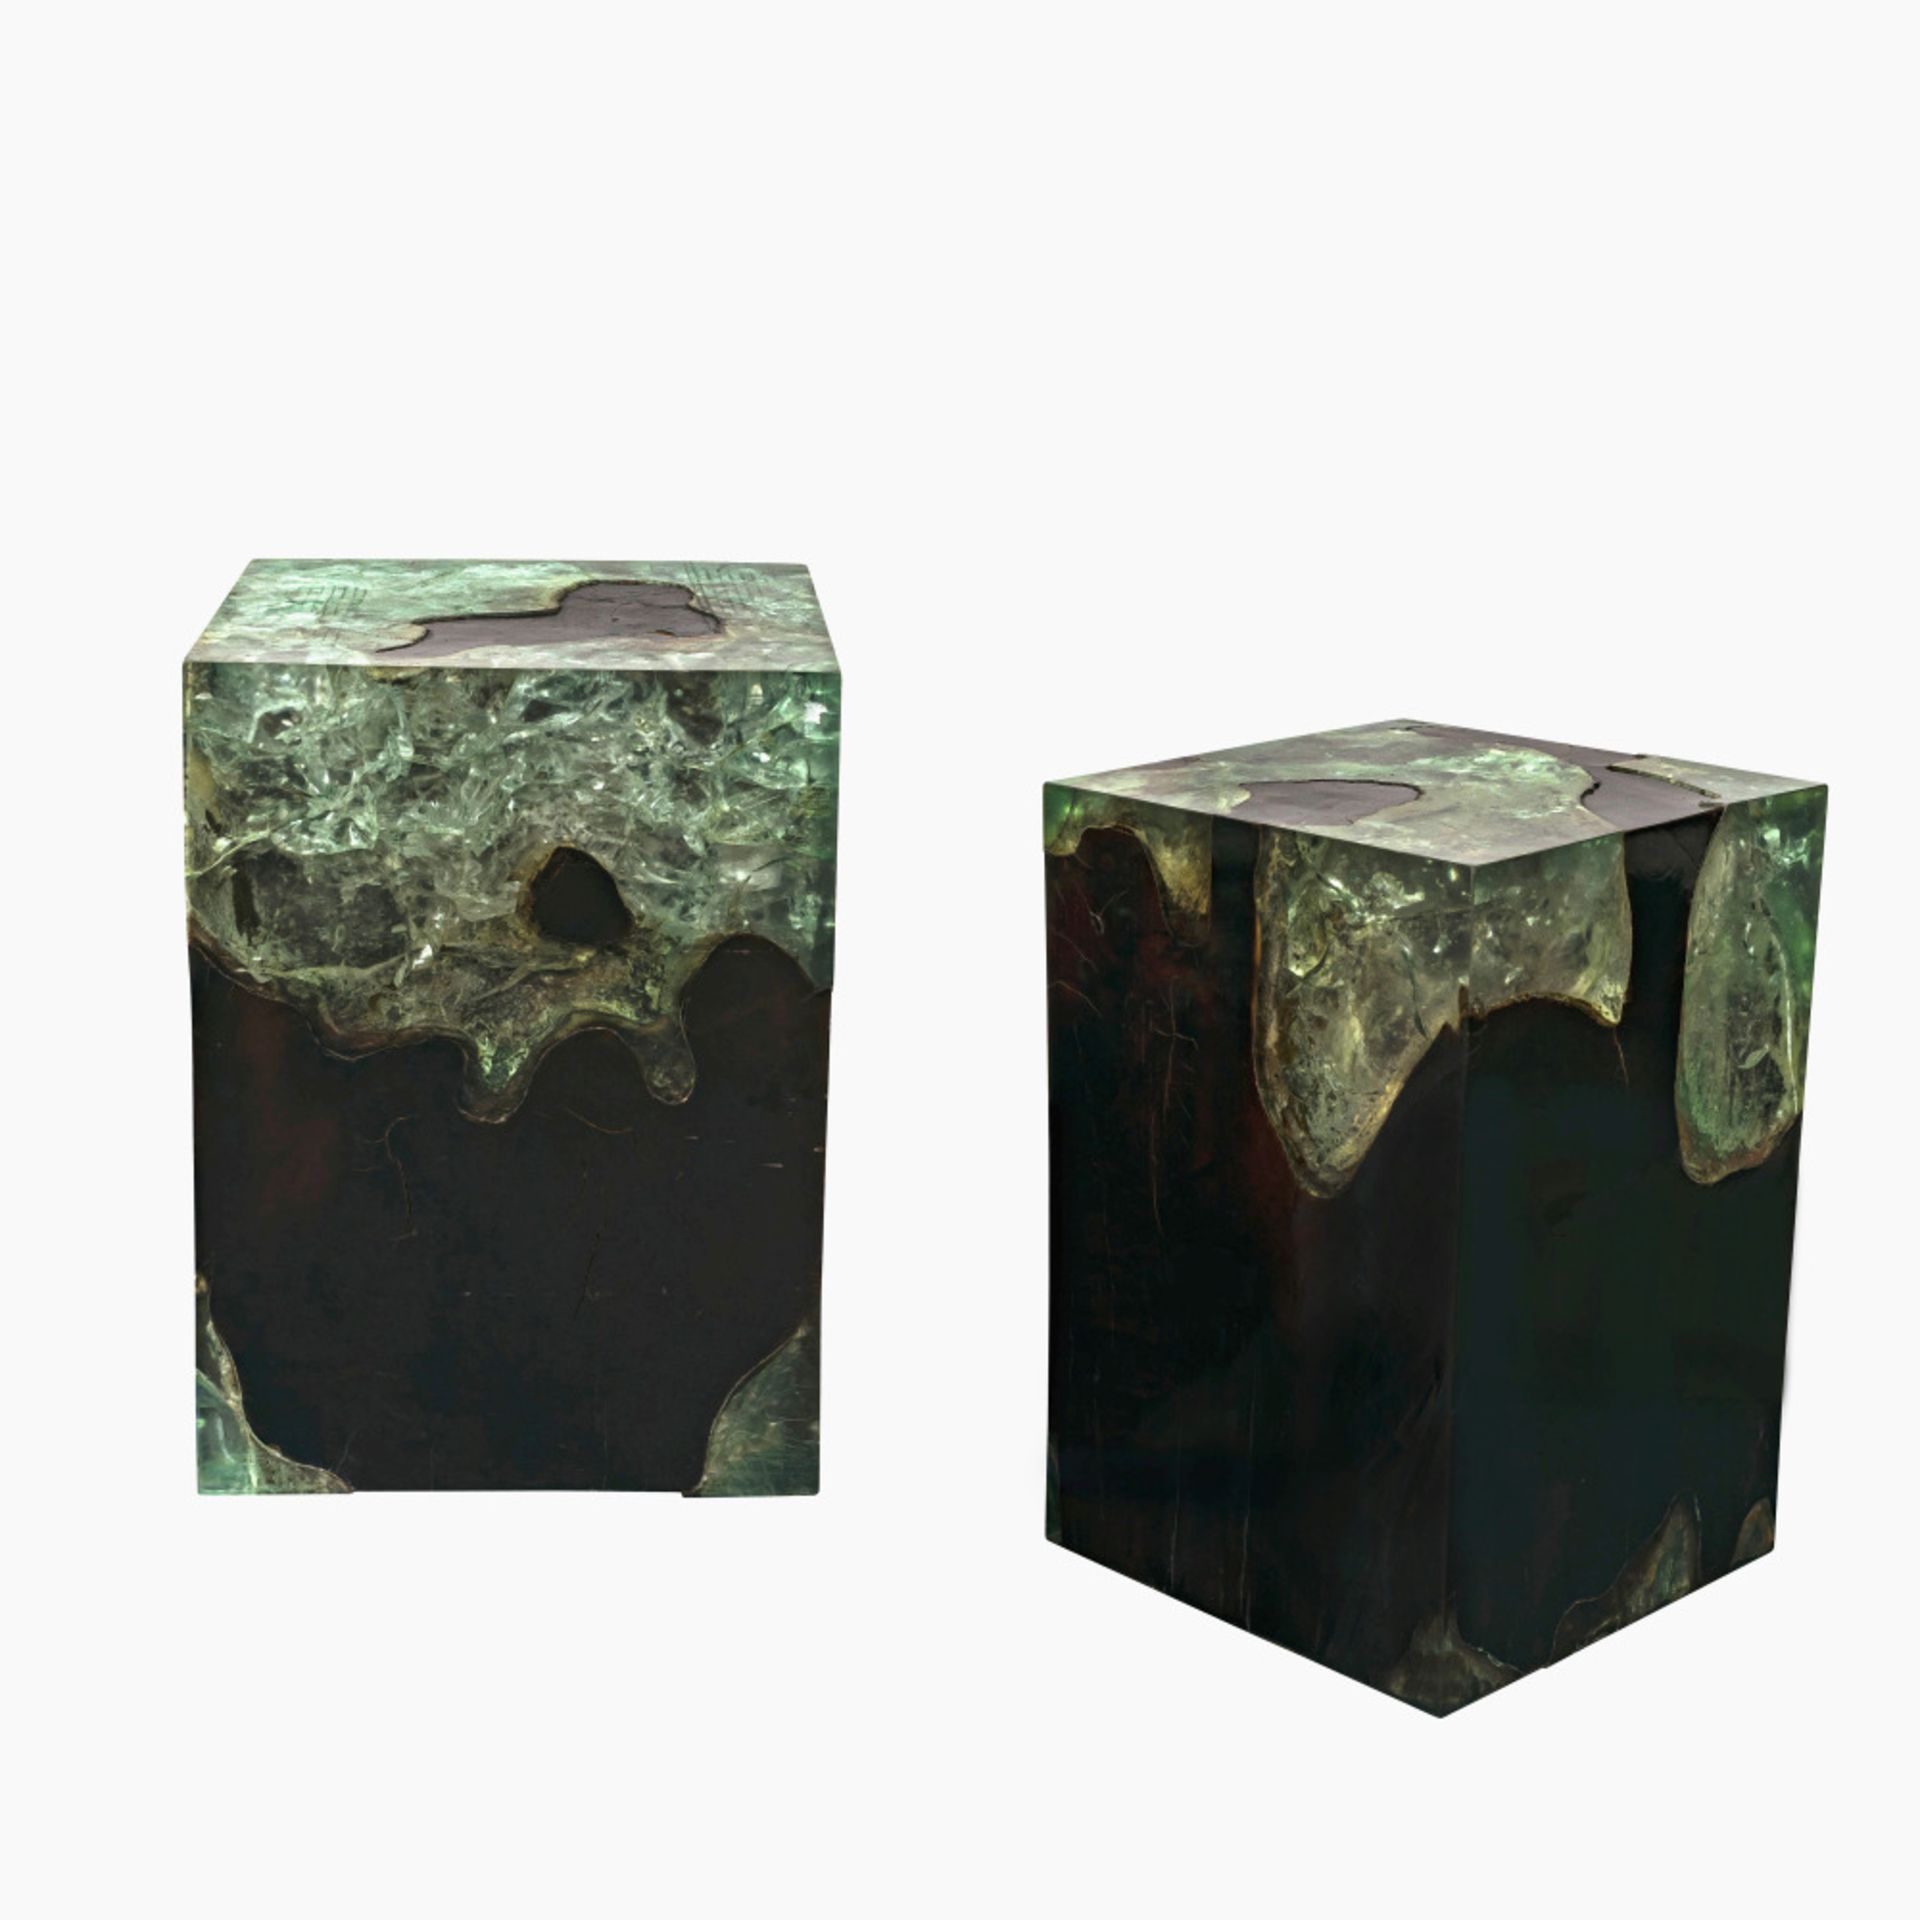 A pair of side cubes